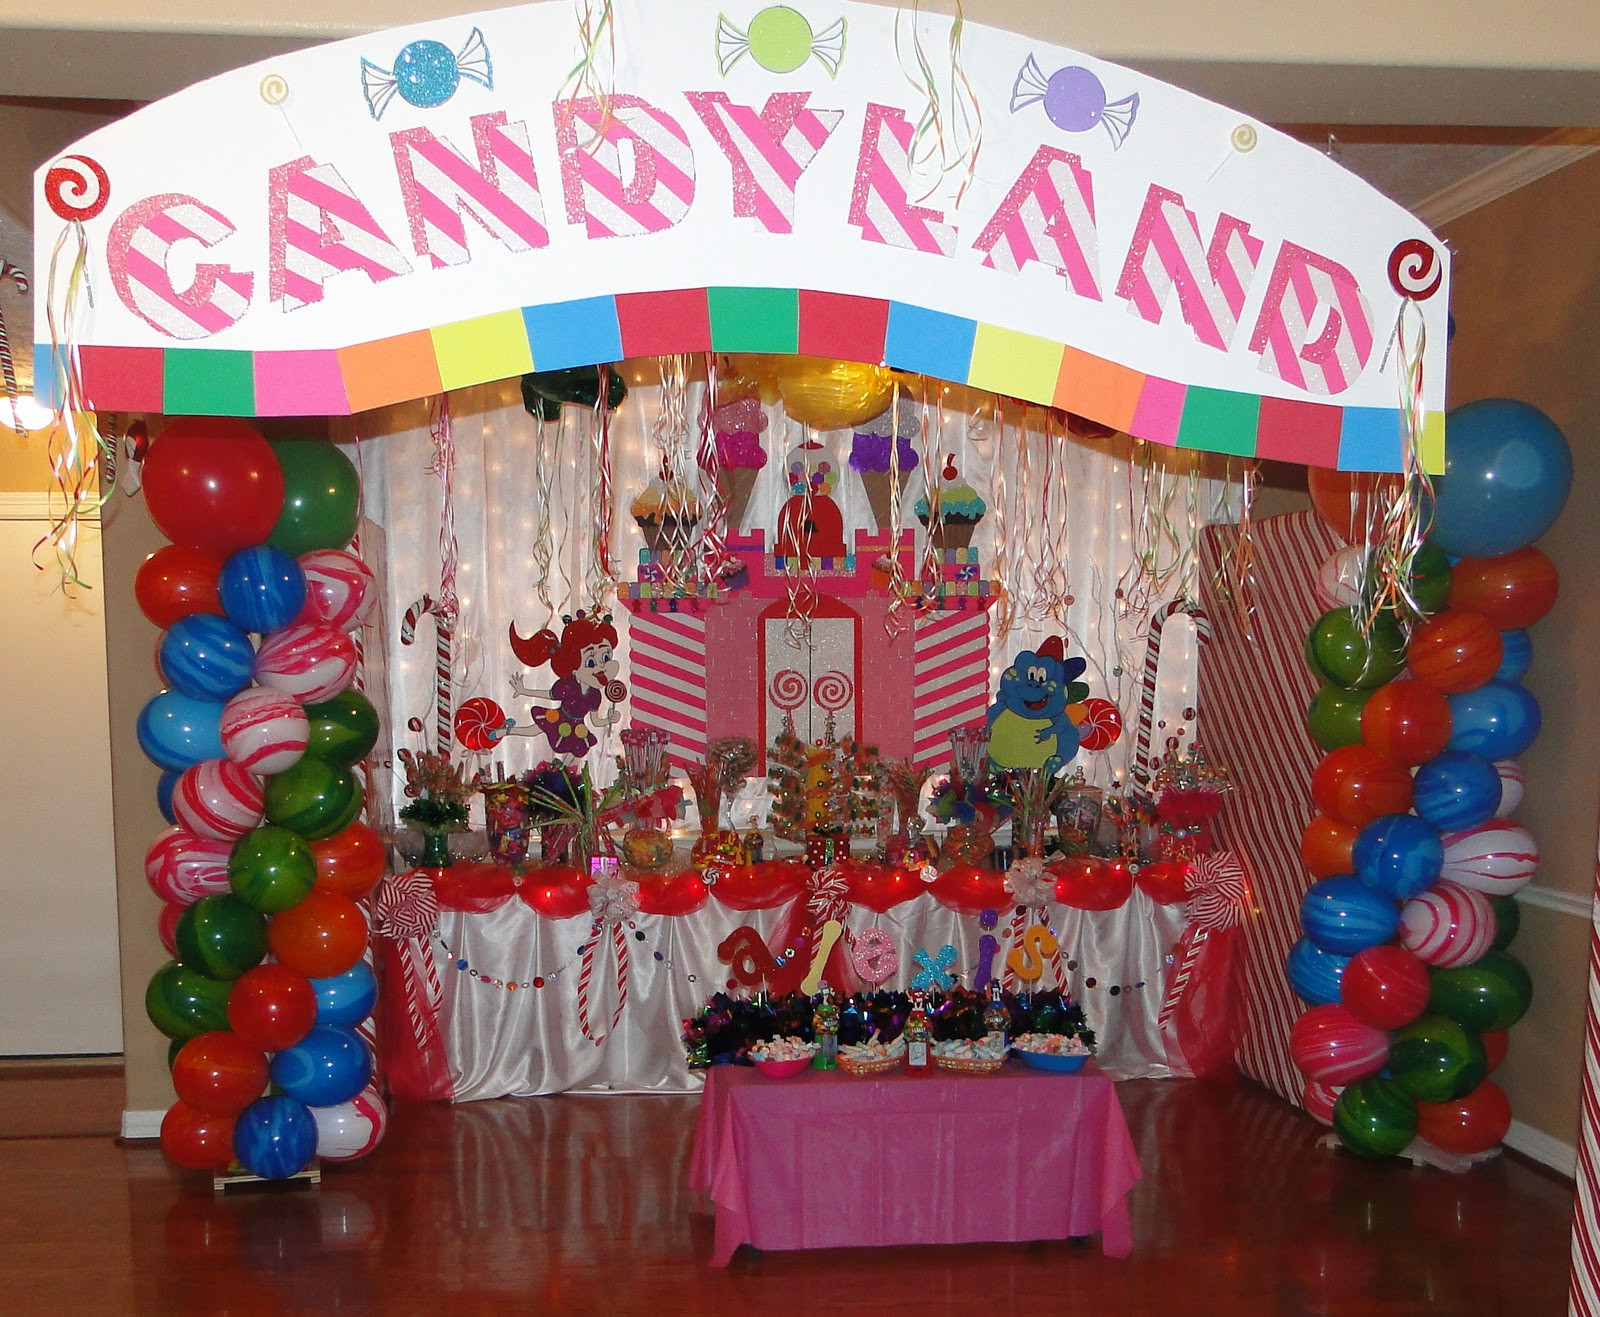 Candyland Birthday Decorations
 Unfor table Creations Designed by Maria Candyland